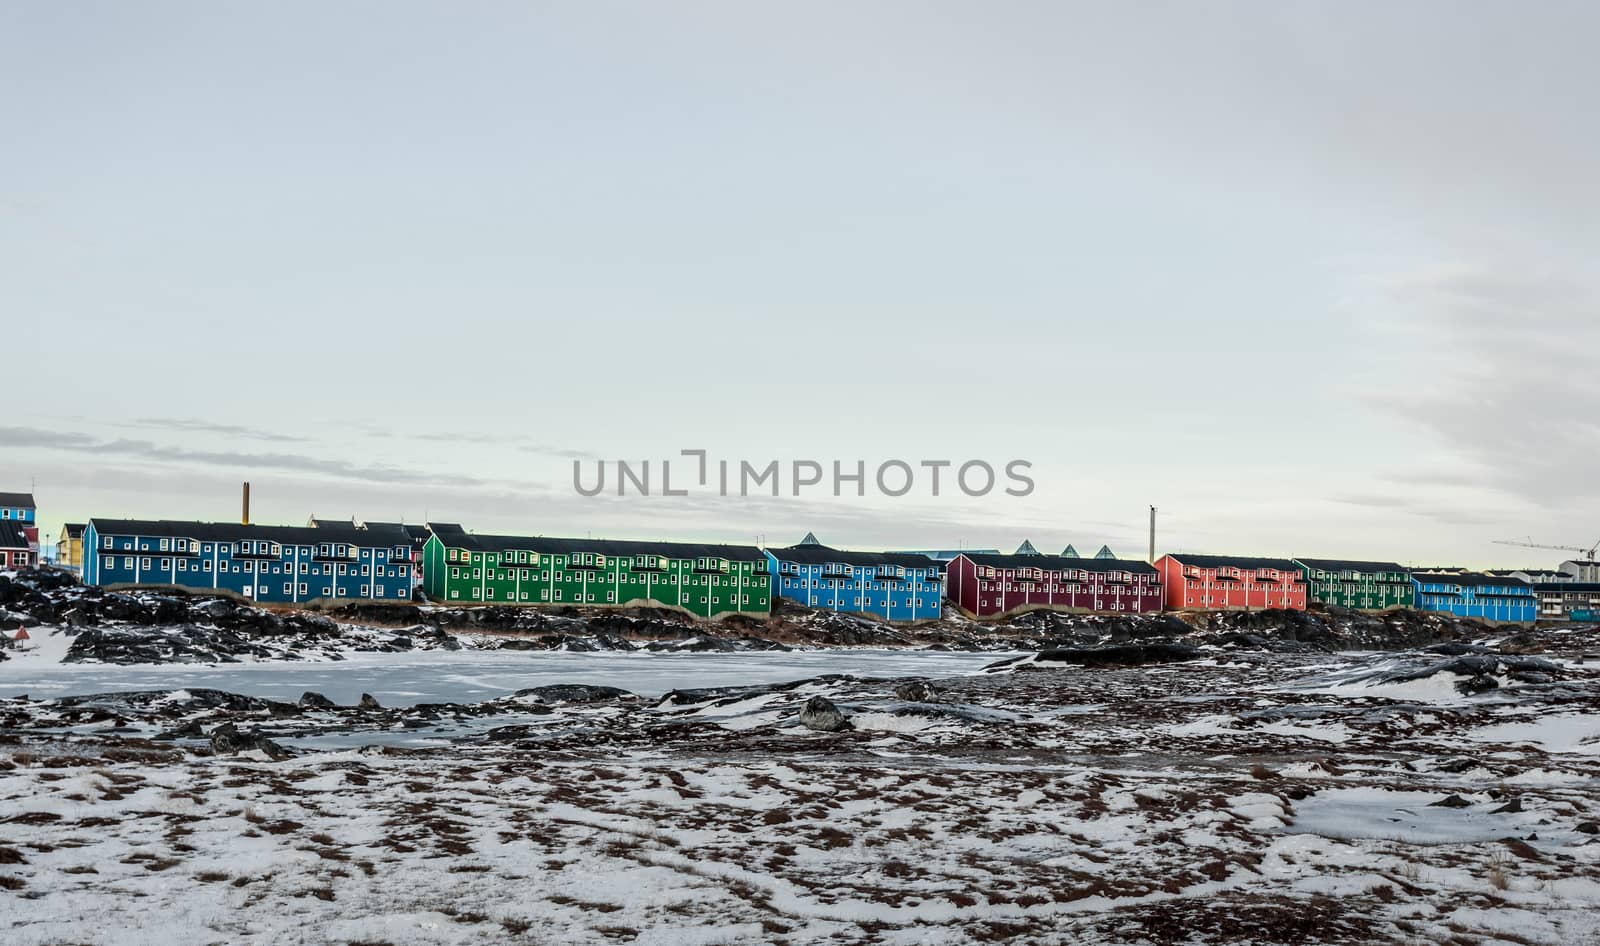 Nuuk city living blocks with colorful long buildings Nuuk, Green by ambeon